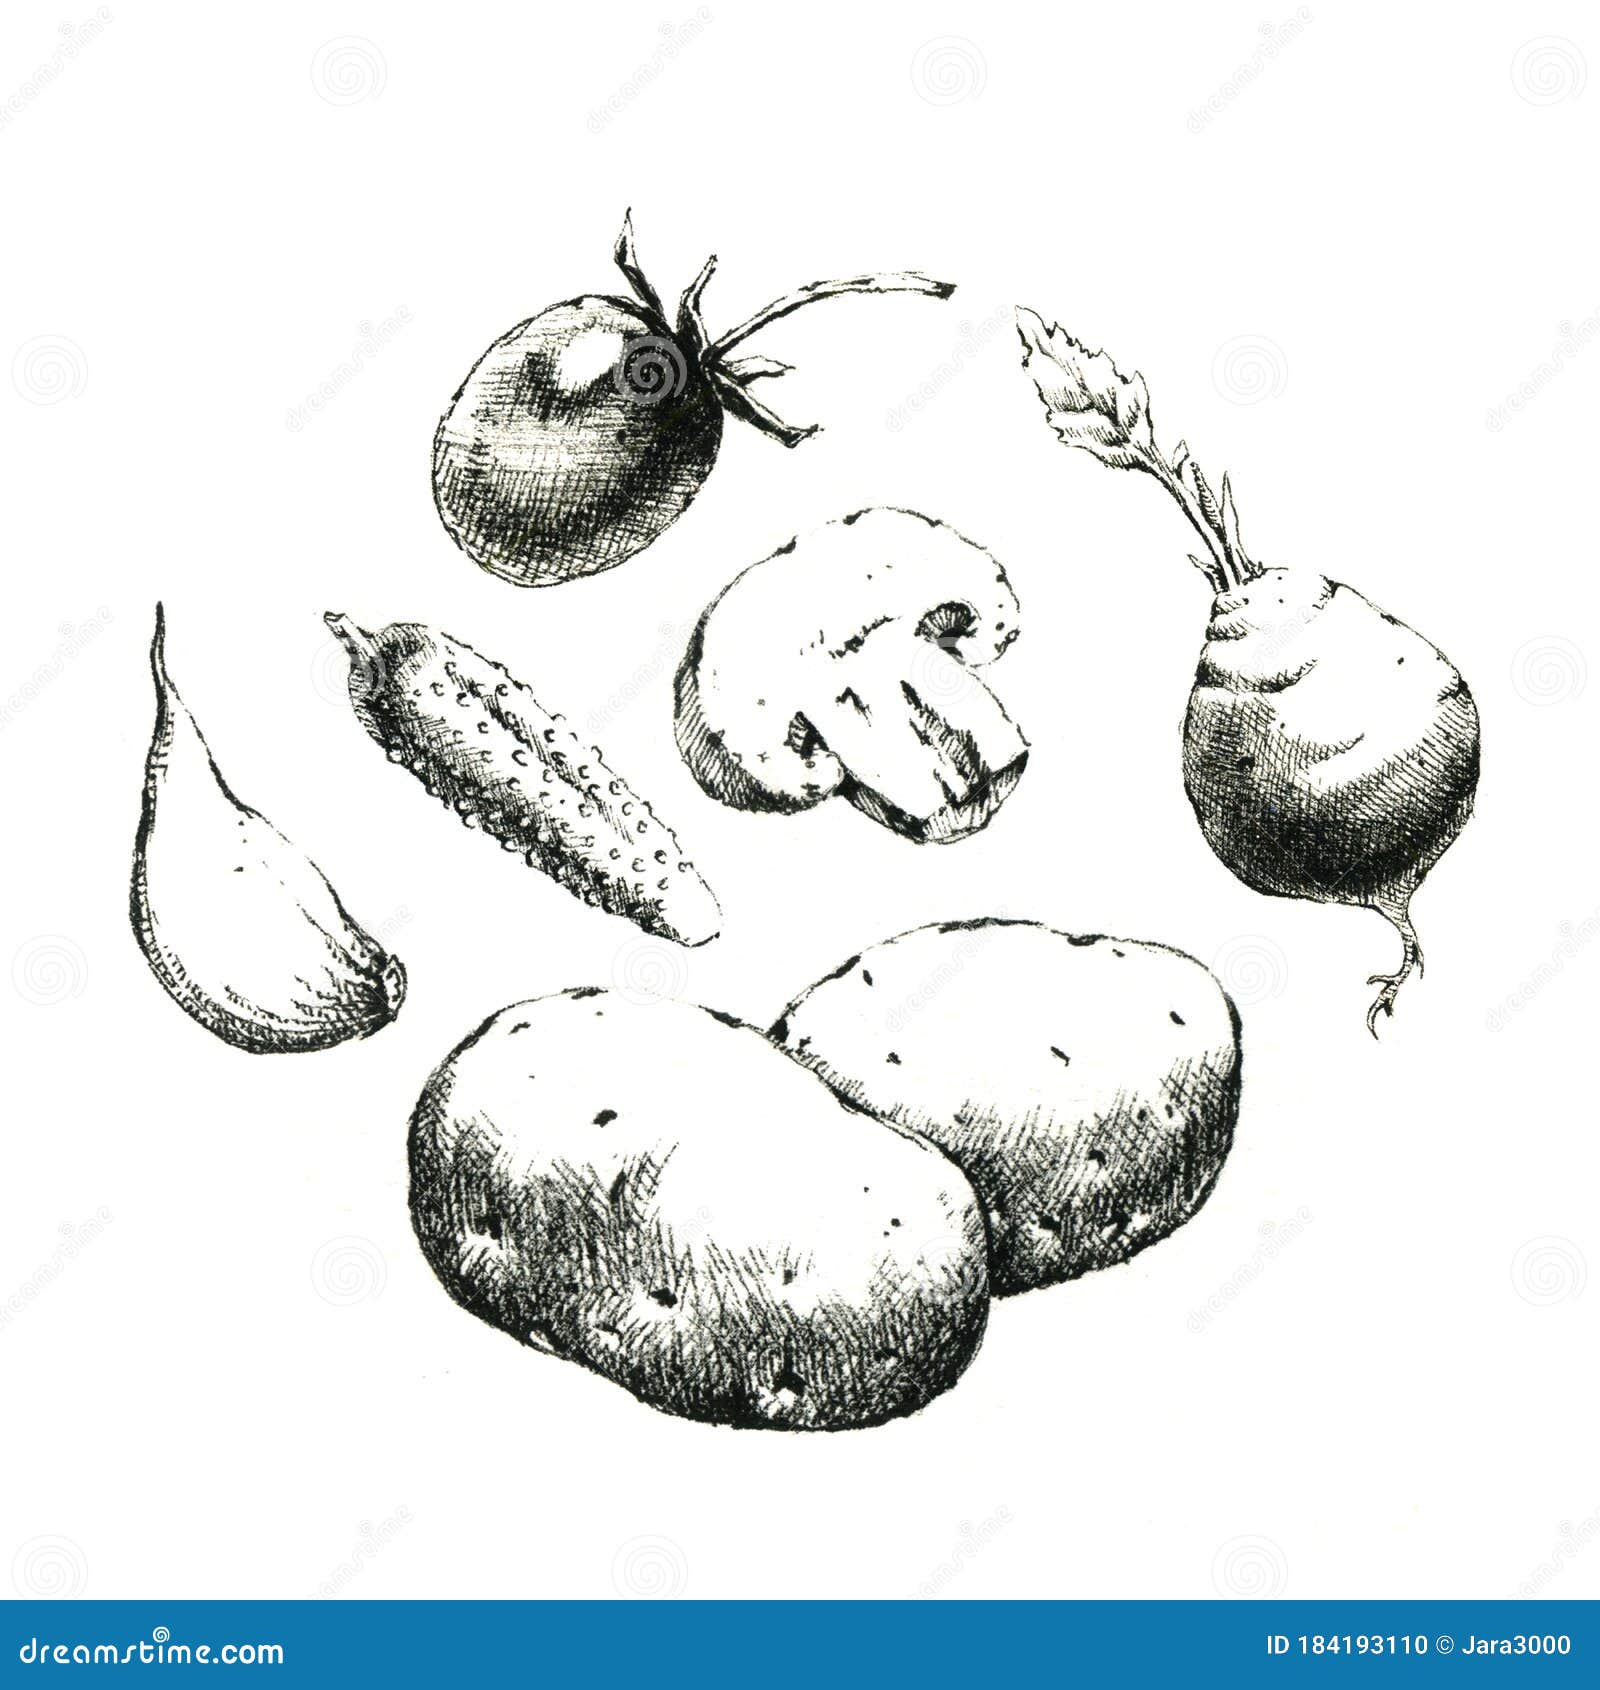 hand-drawn black and white image of vegetables. jpeg only